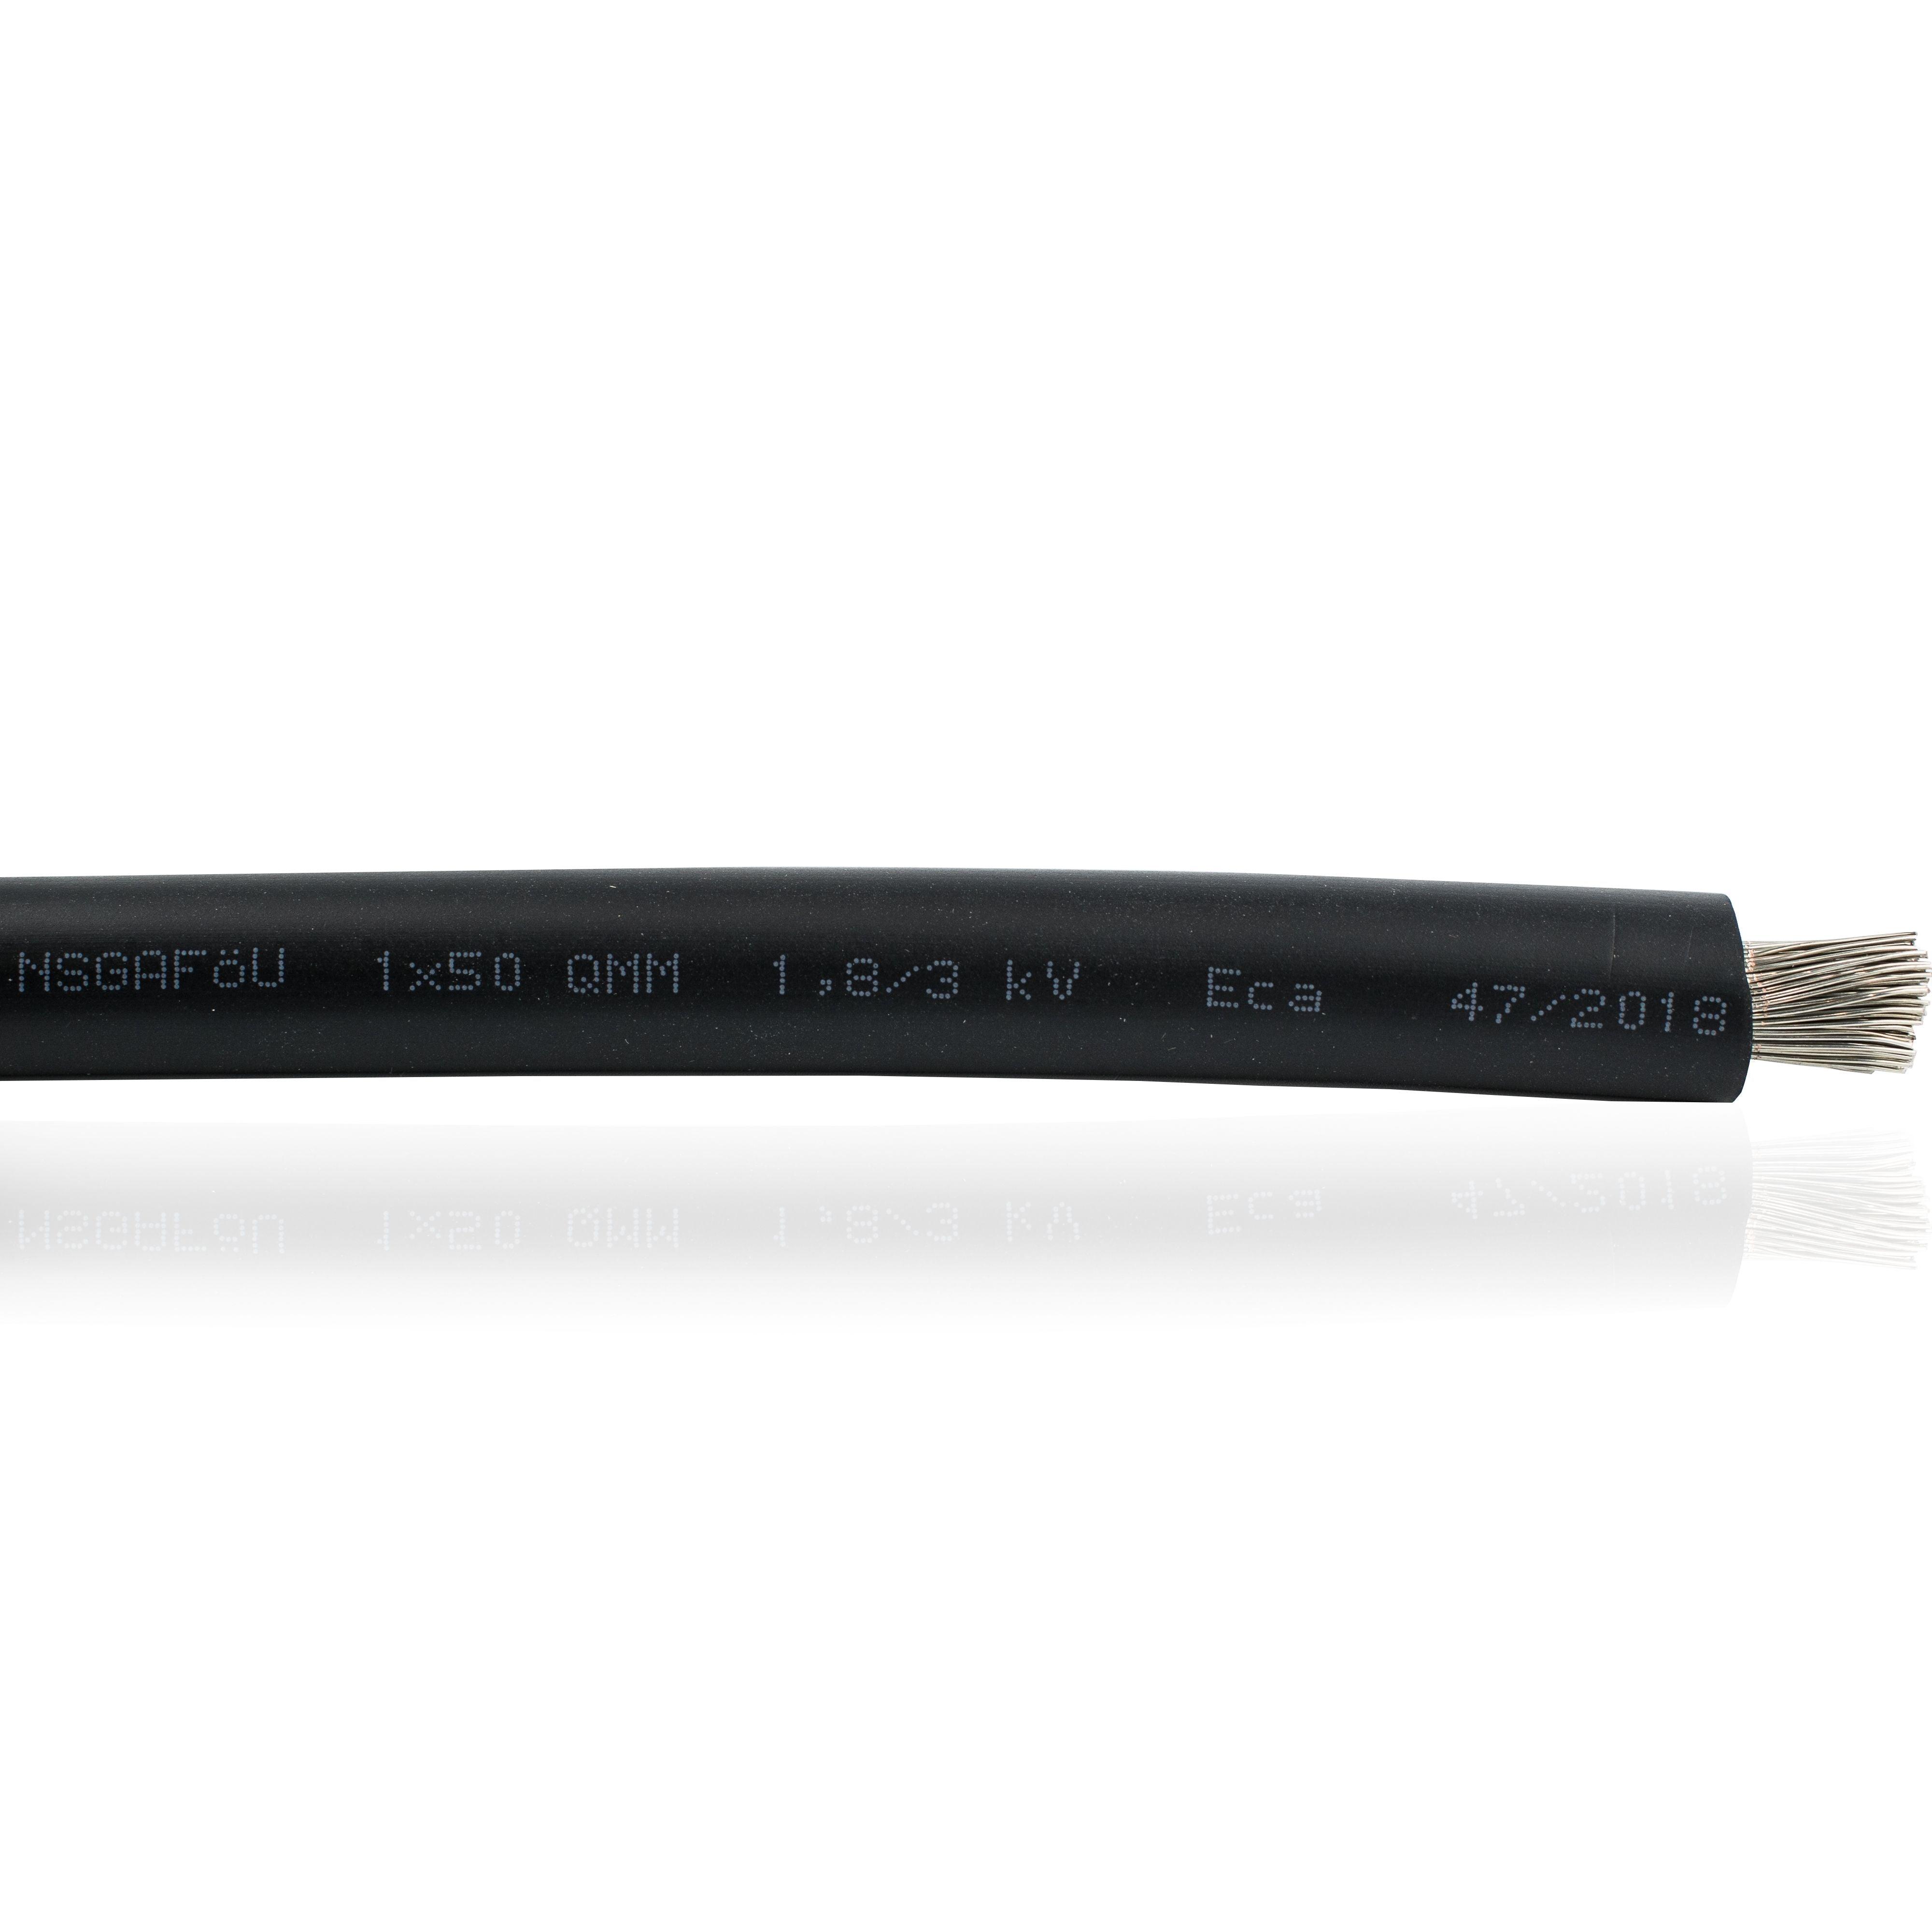 Helukabel 70mm² Battery Flexible Cables Double Insulated - VoltaconSolar